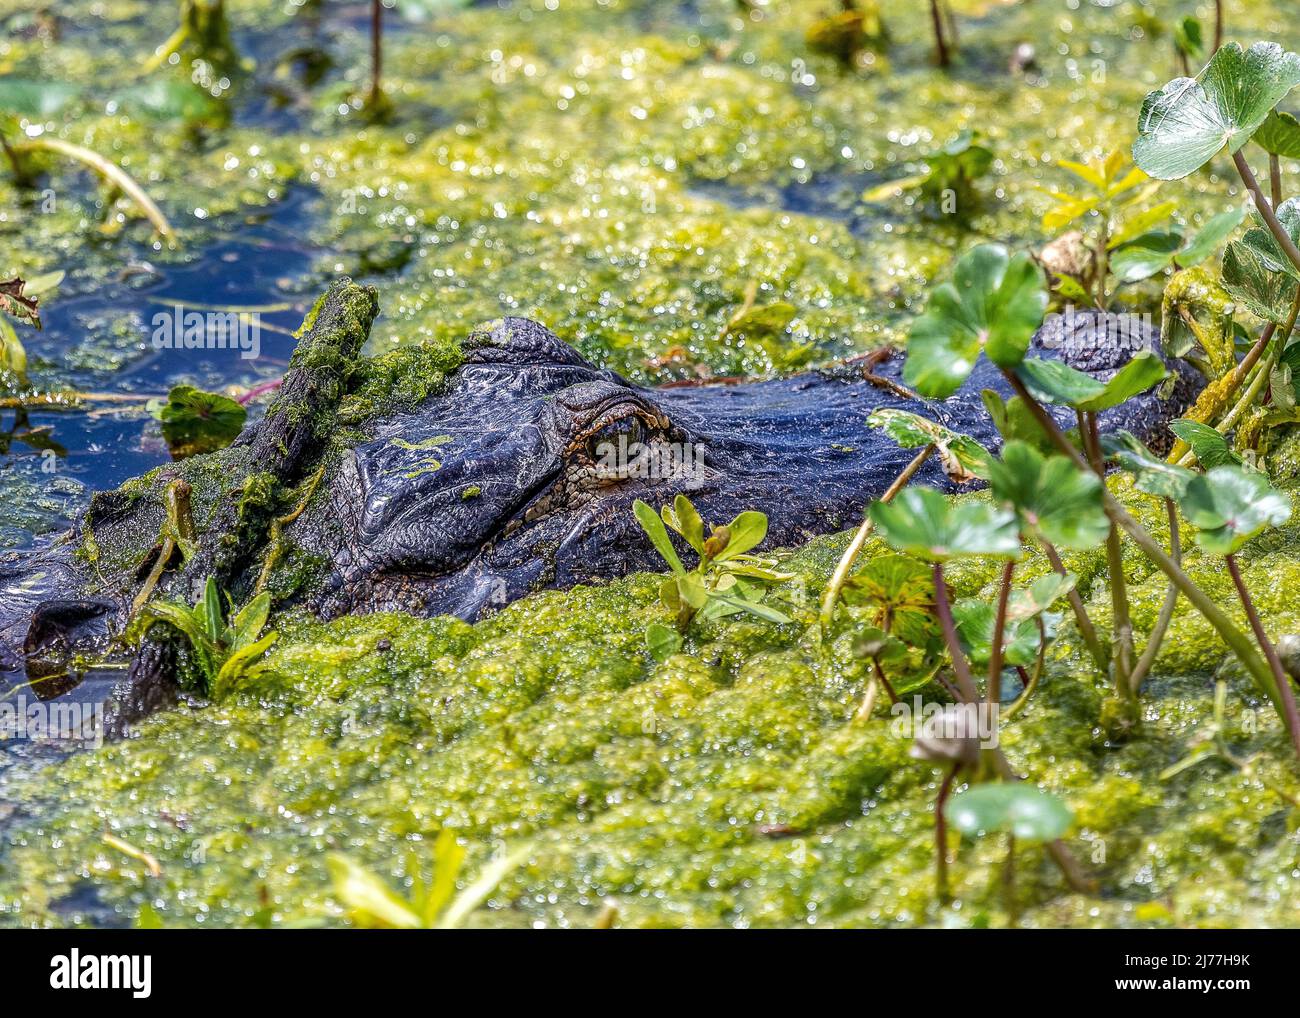 Alligator slowly rising to the surface in the marsh at Sweetwater wetlands park Stock Photo